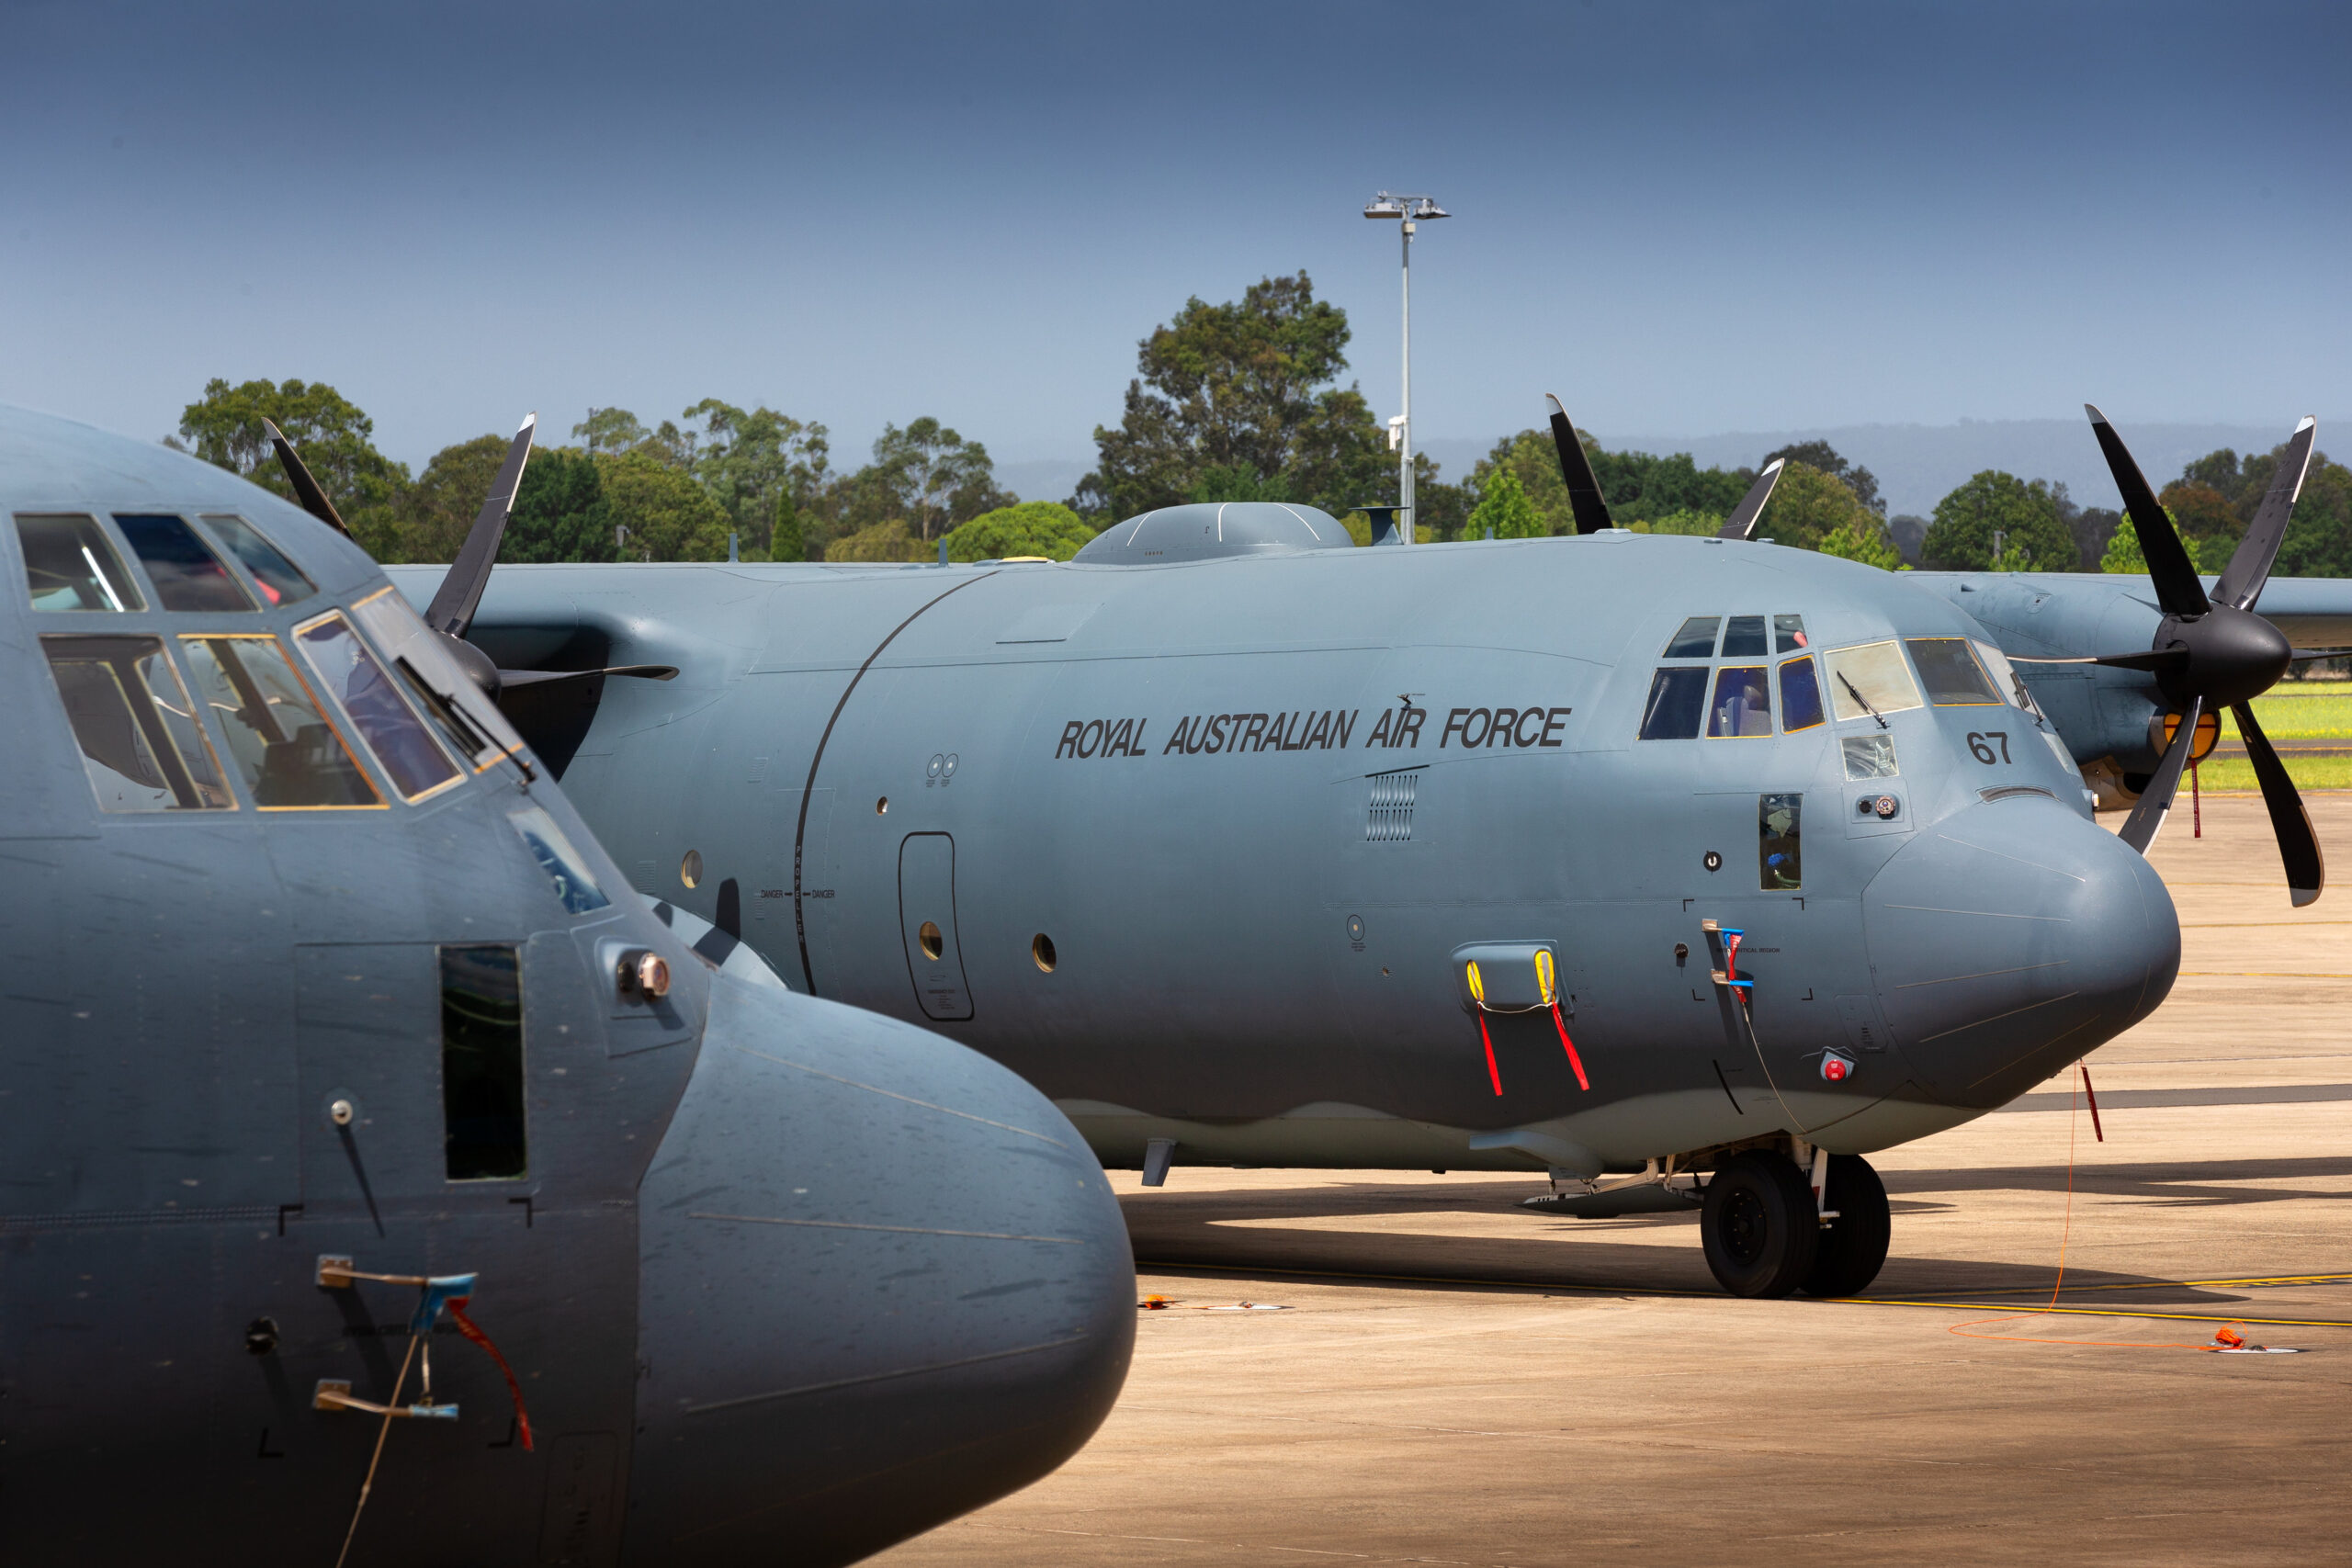 No. 37 Squadron C-130J Hercules A97-448 and A97-467 on the RAAF Base Richmond flightline. Both aircraft have been fitted with Ka-Band Satellite Communications antennas. *** Local Caption *** A second C-130J Hercules has been fitted with a Ka-Band Satellite Communications (SATCOM) antenna, providing aircrew and embarked personnel with high-speed data connectivity whilst on missions around the globe. The Ka-band SATCOM system was installed on C-130J A97-467, and follows an installation of the same system on A97-448 in 2017. Air Force plans to equip a total of six C-130Js with the SATCOM system, which can support live-streaming of high-definition video, in-flight mission planning, and coordination with headquarters and other nodes around the world.